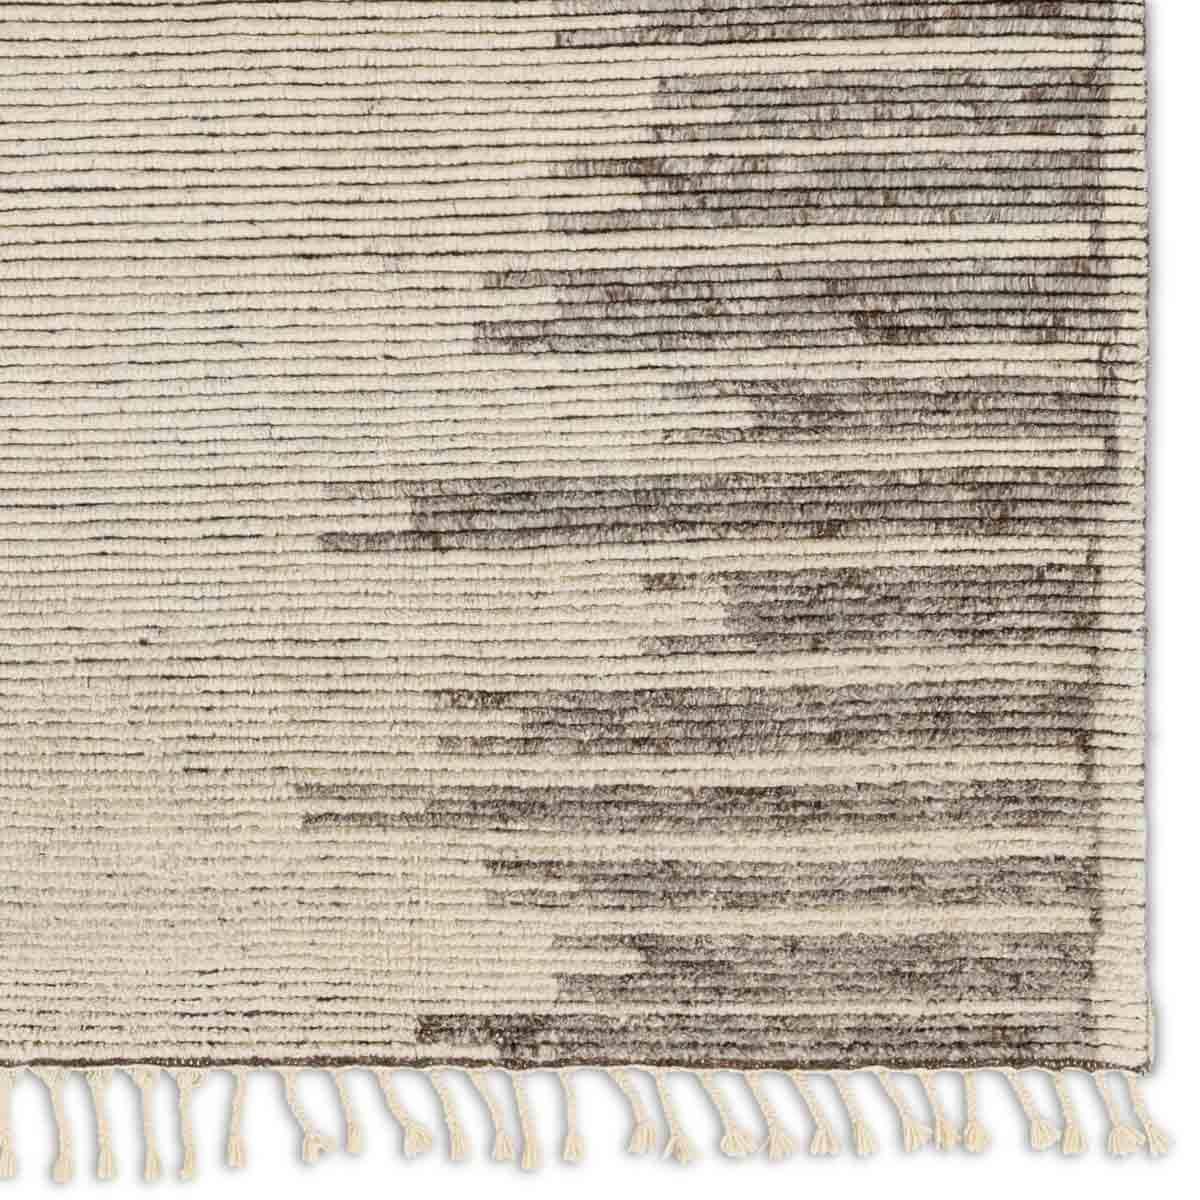 Inspired by textiles from the Tullu region in Morocco, the Patra area rug showcases a linear design in neutral shades of cream, taupe, brown, and gray. This high-piled accent lends warmth and comfort to any space with durable wool hand-knotted onto a cotton foundation. Braided fringe trims the edges for a touch of boho charm. Amethyst Home provides interior design, new home construction design consulting, vintage area rugs, and lighting in the Charlotte metro area.